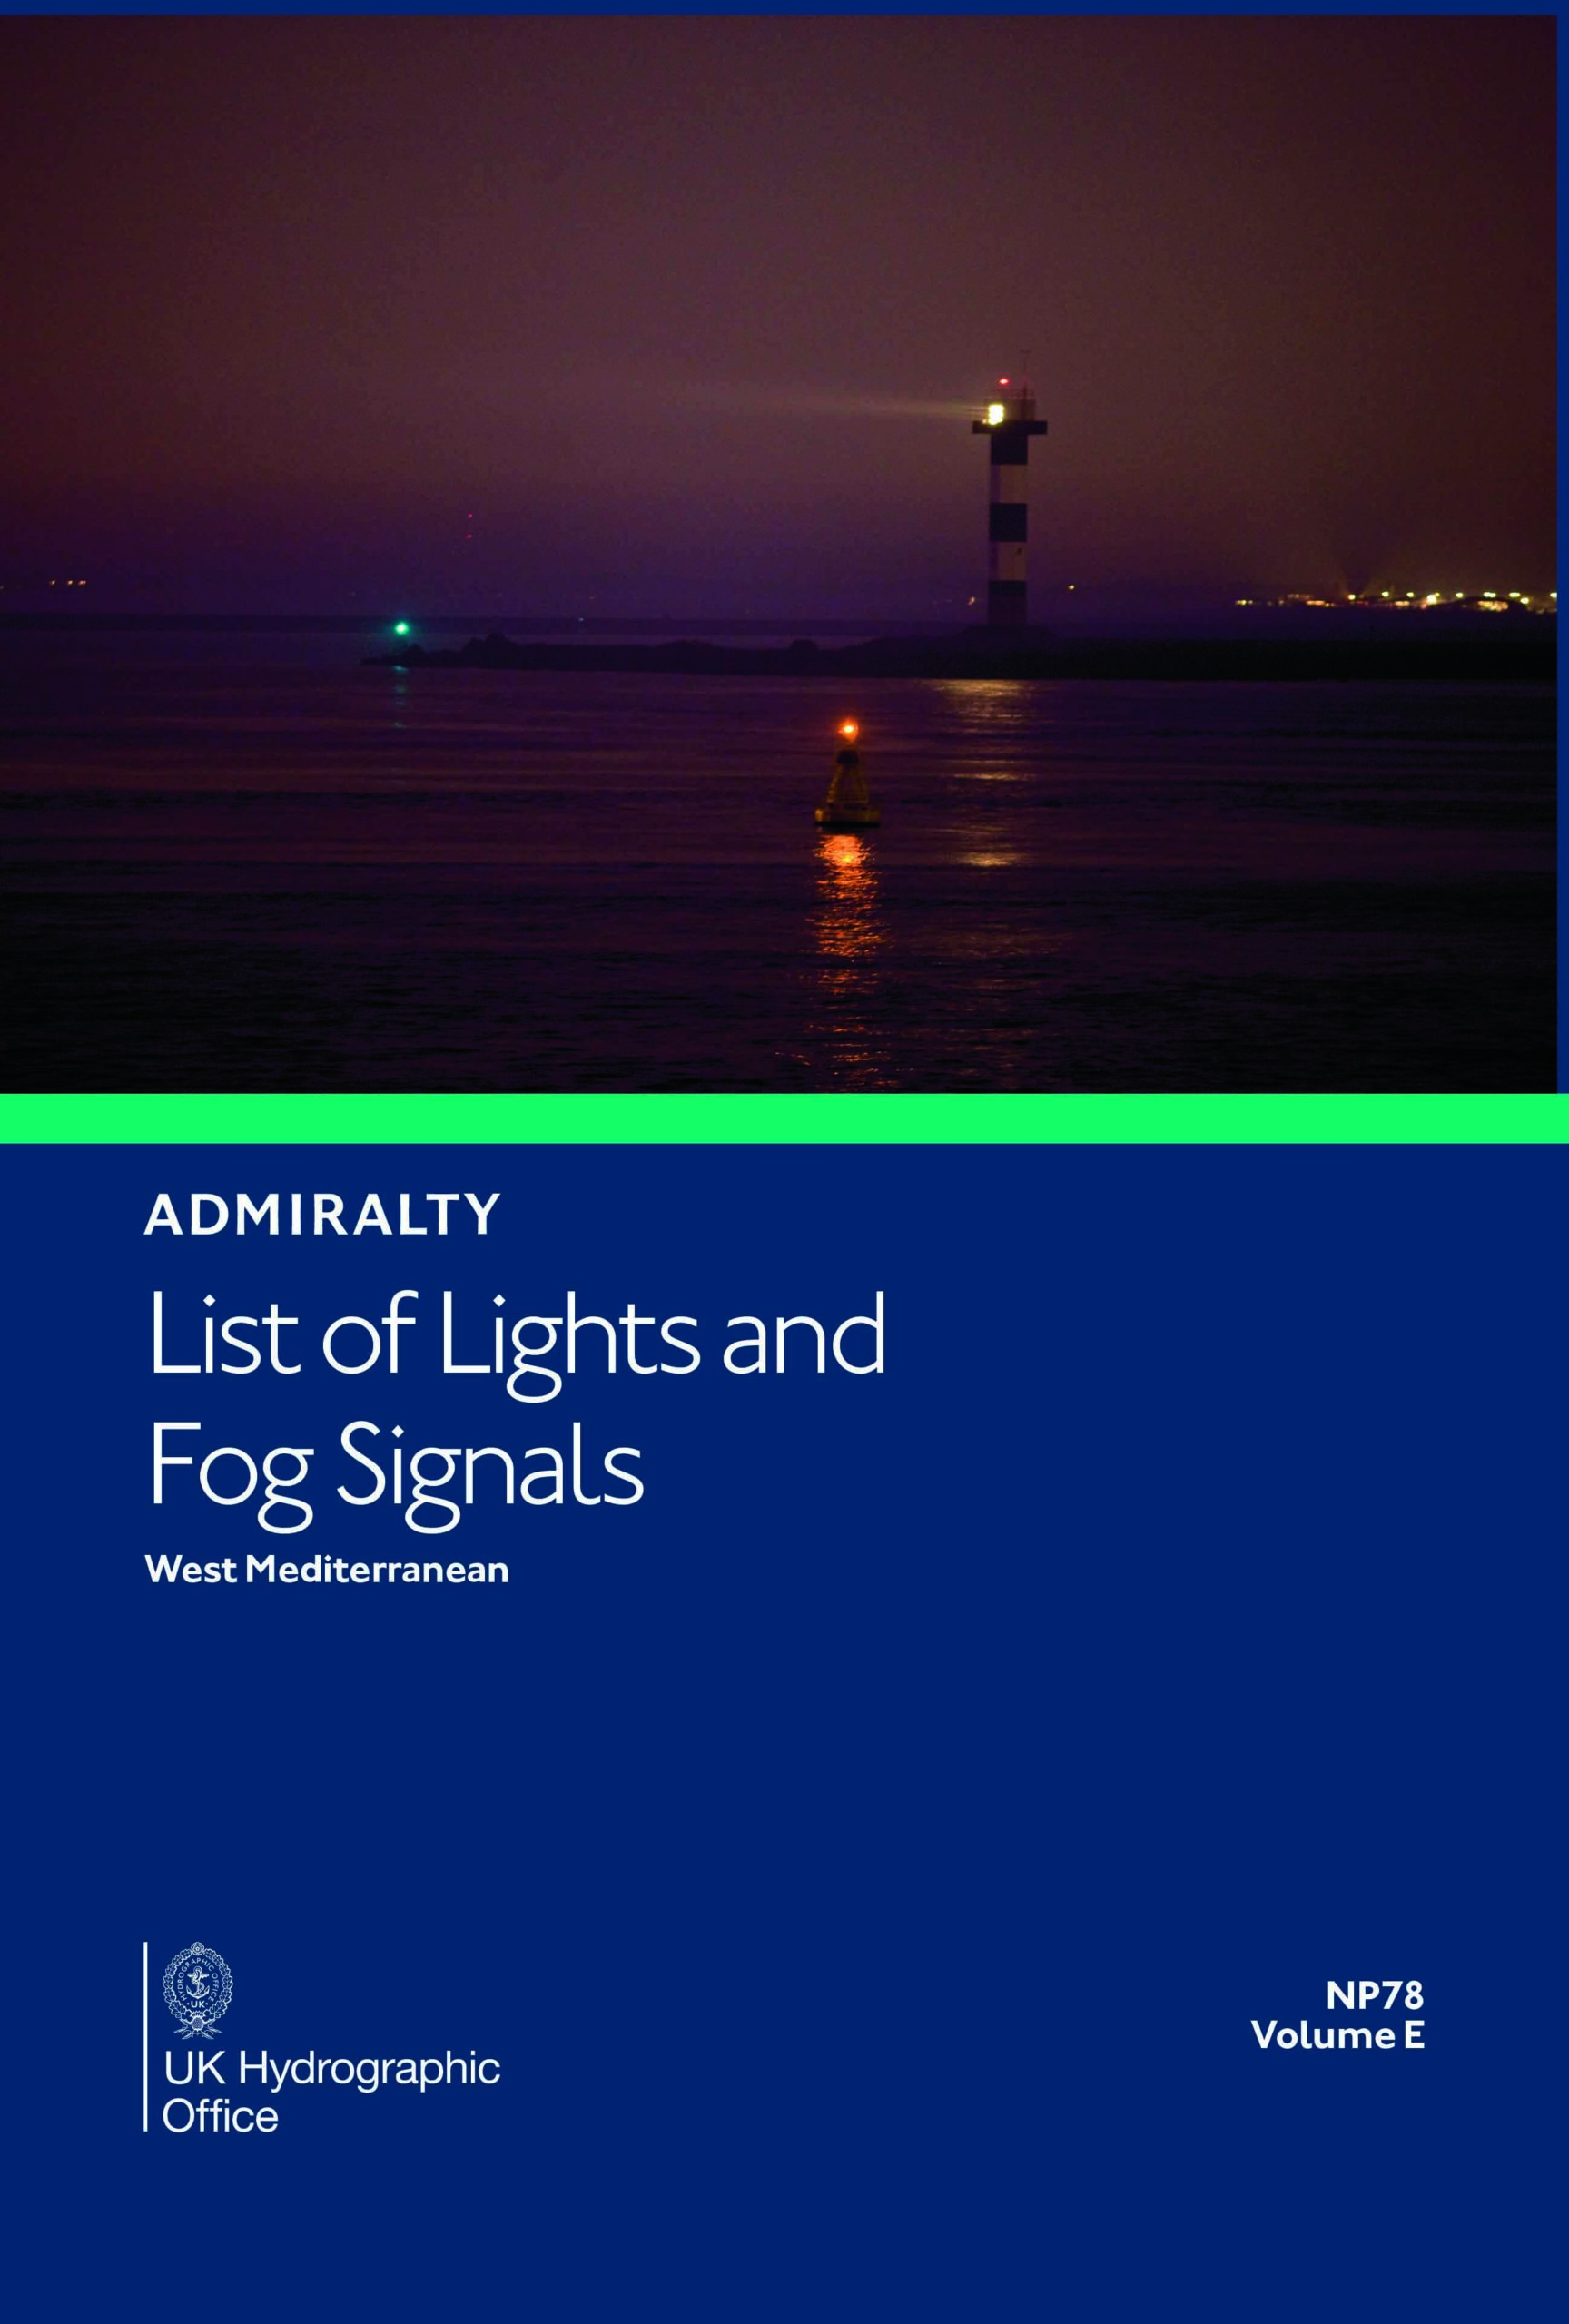 NP78 Admiralty List of Lights and Fog Signals Volume E